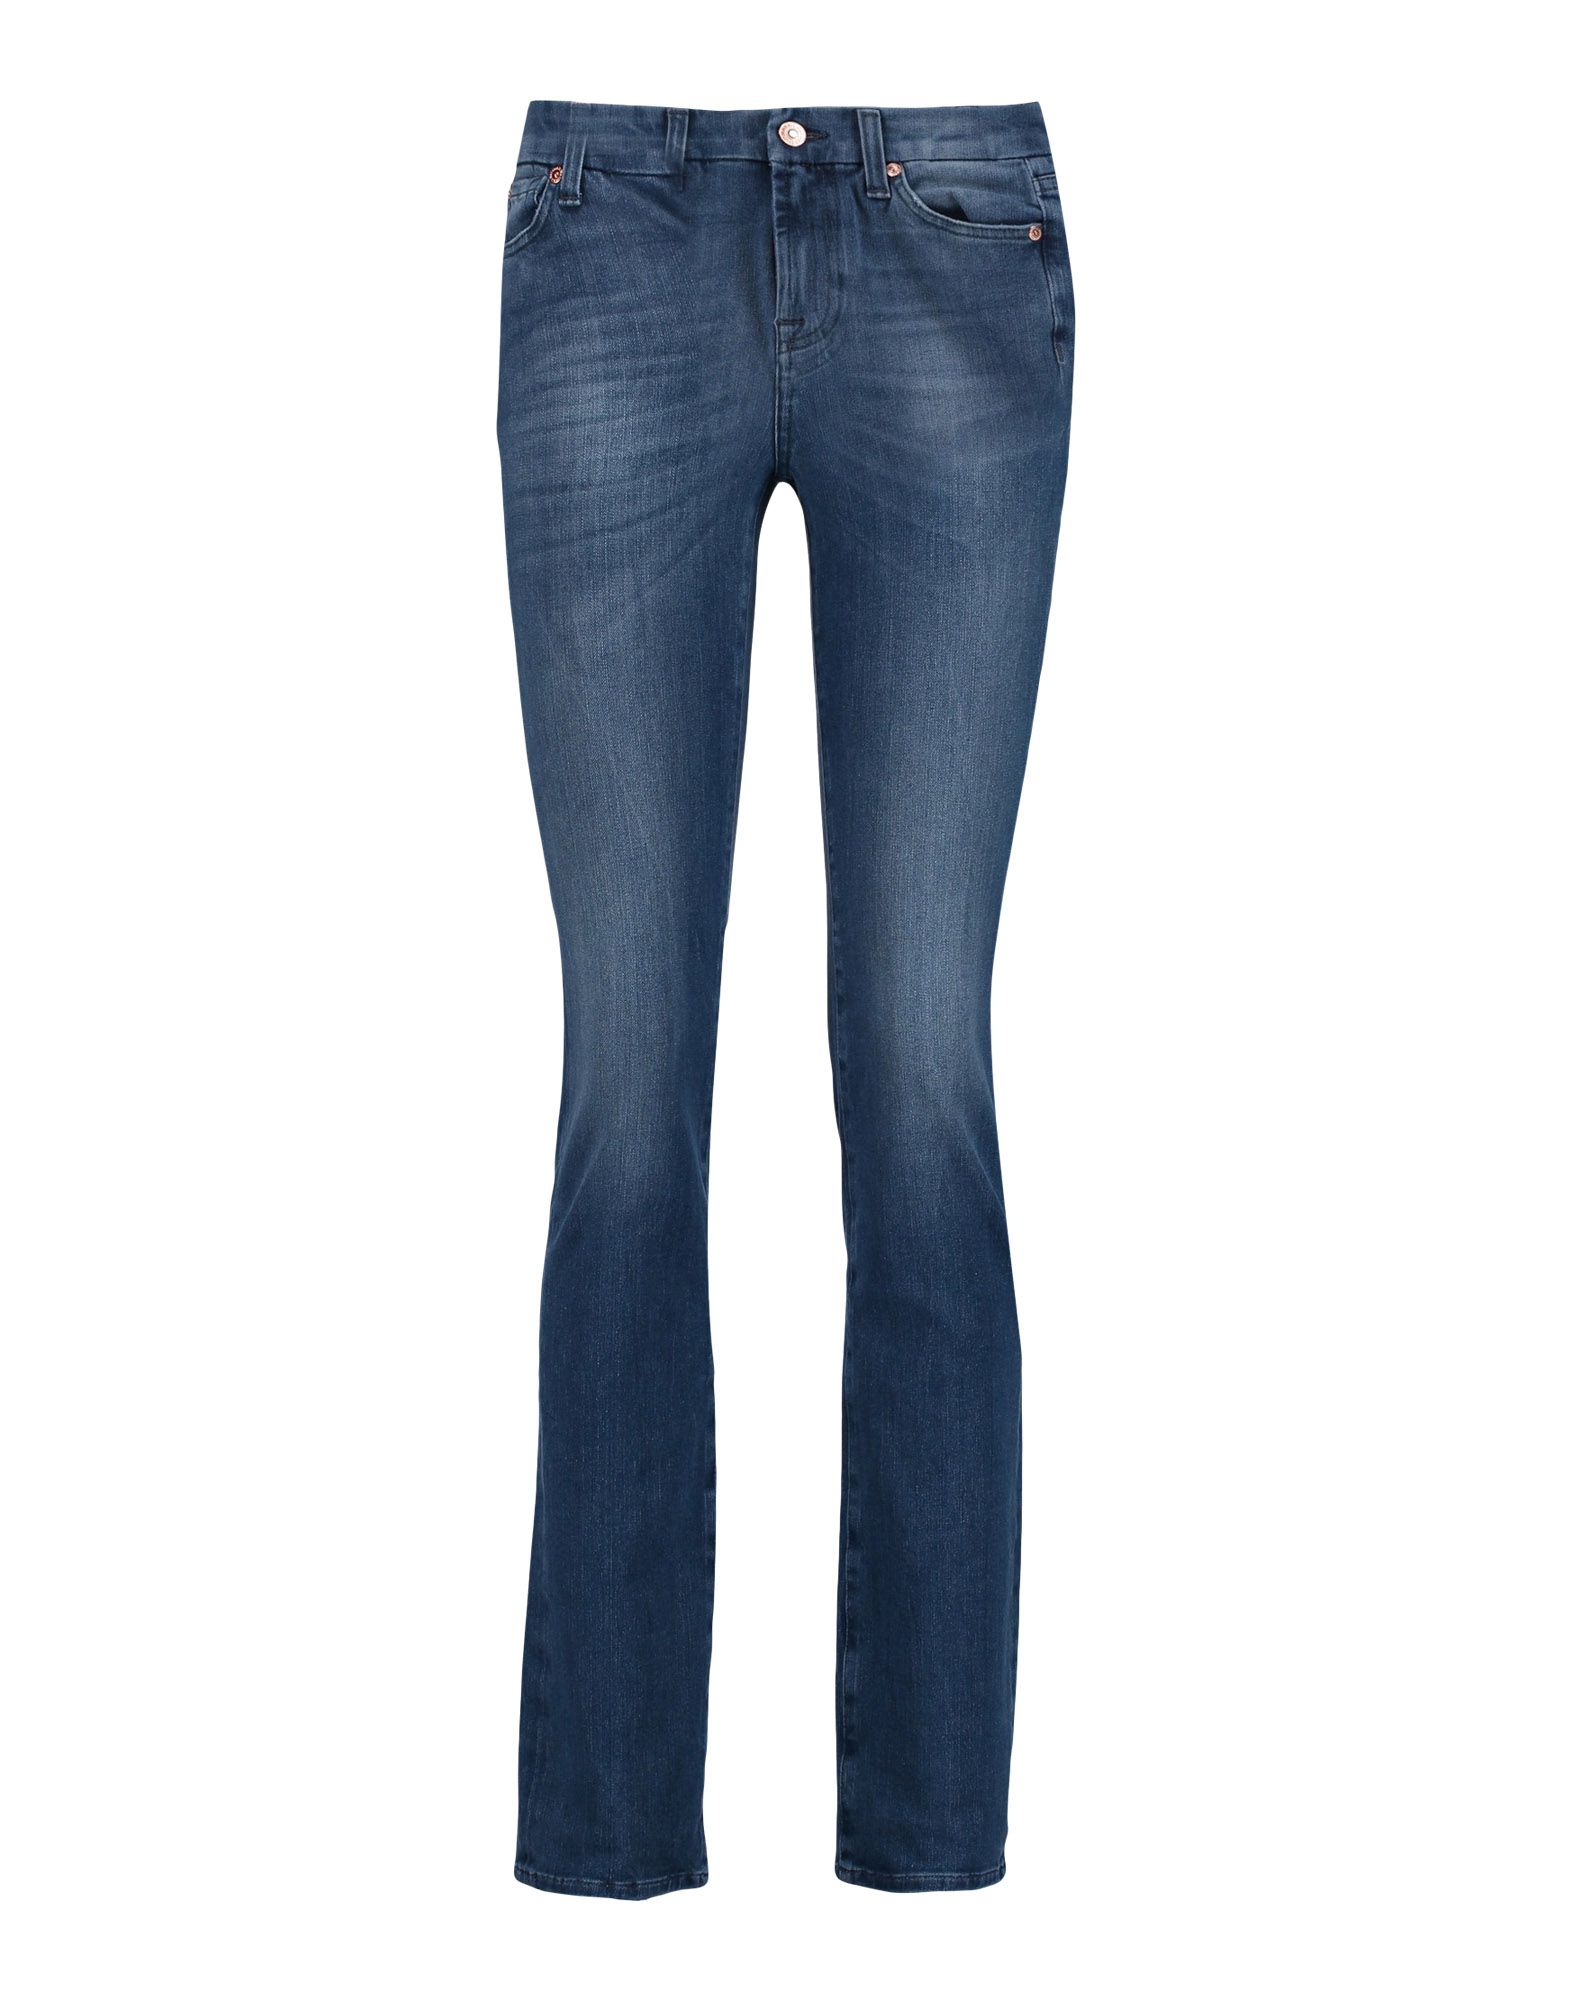 7 FOR ALL MANKIND Denim pants,42683037HP 1